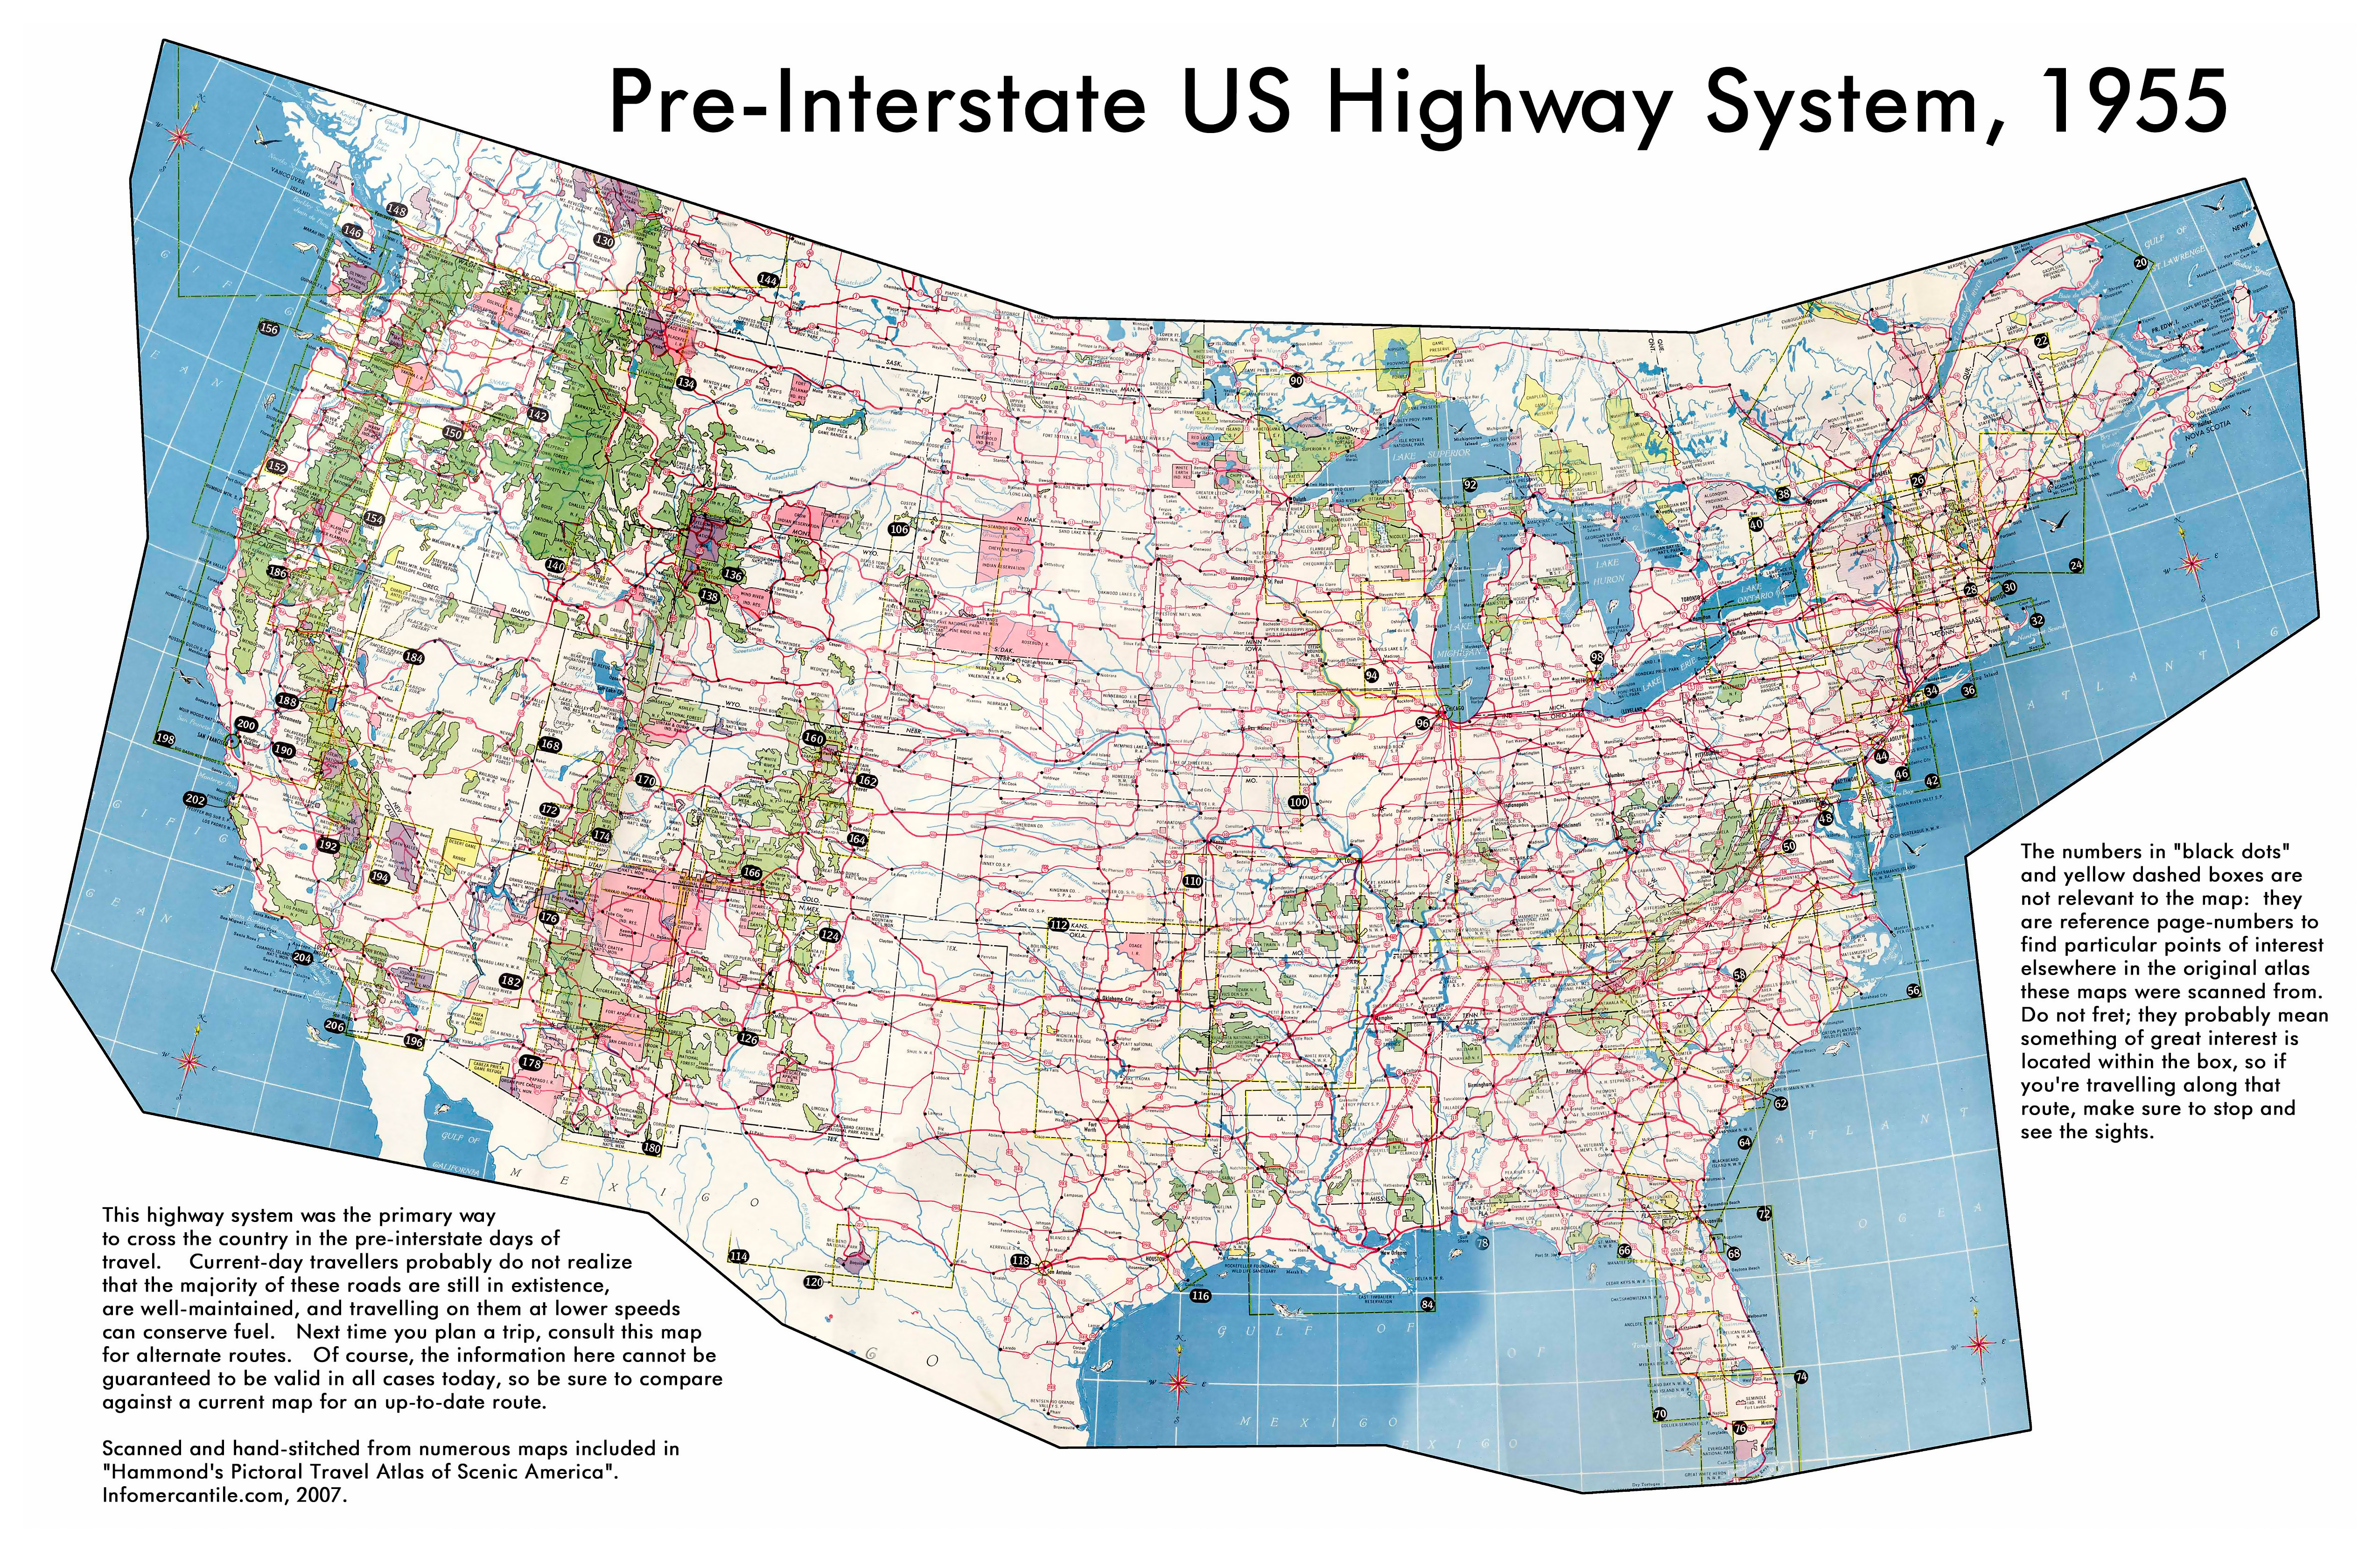 Large highways system map of the USA - 1955 | USA | Maps of the USA